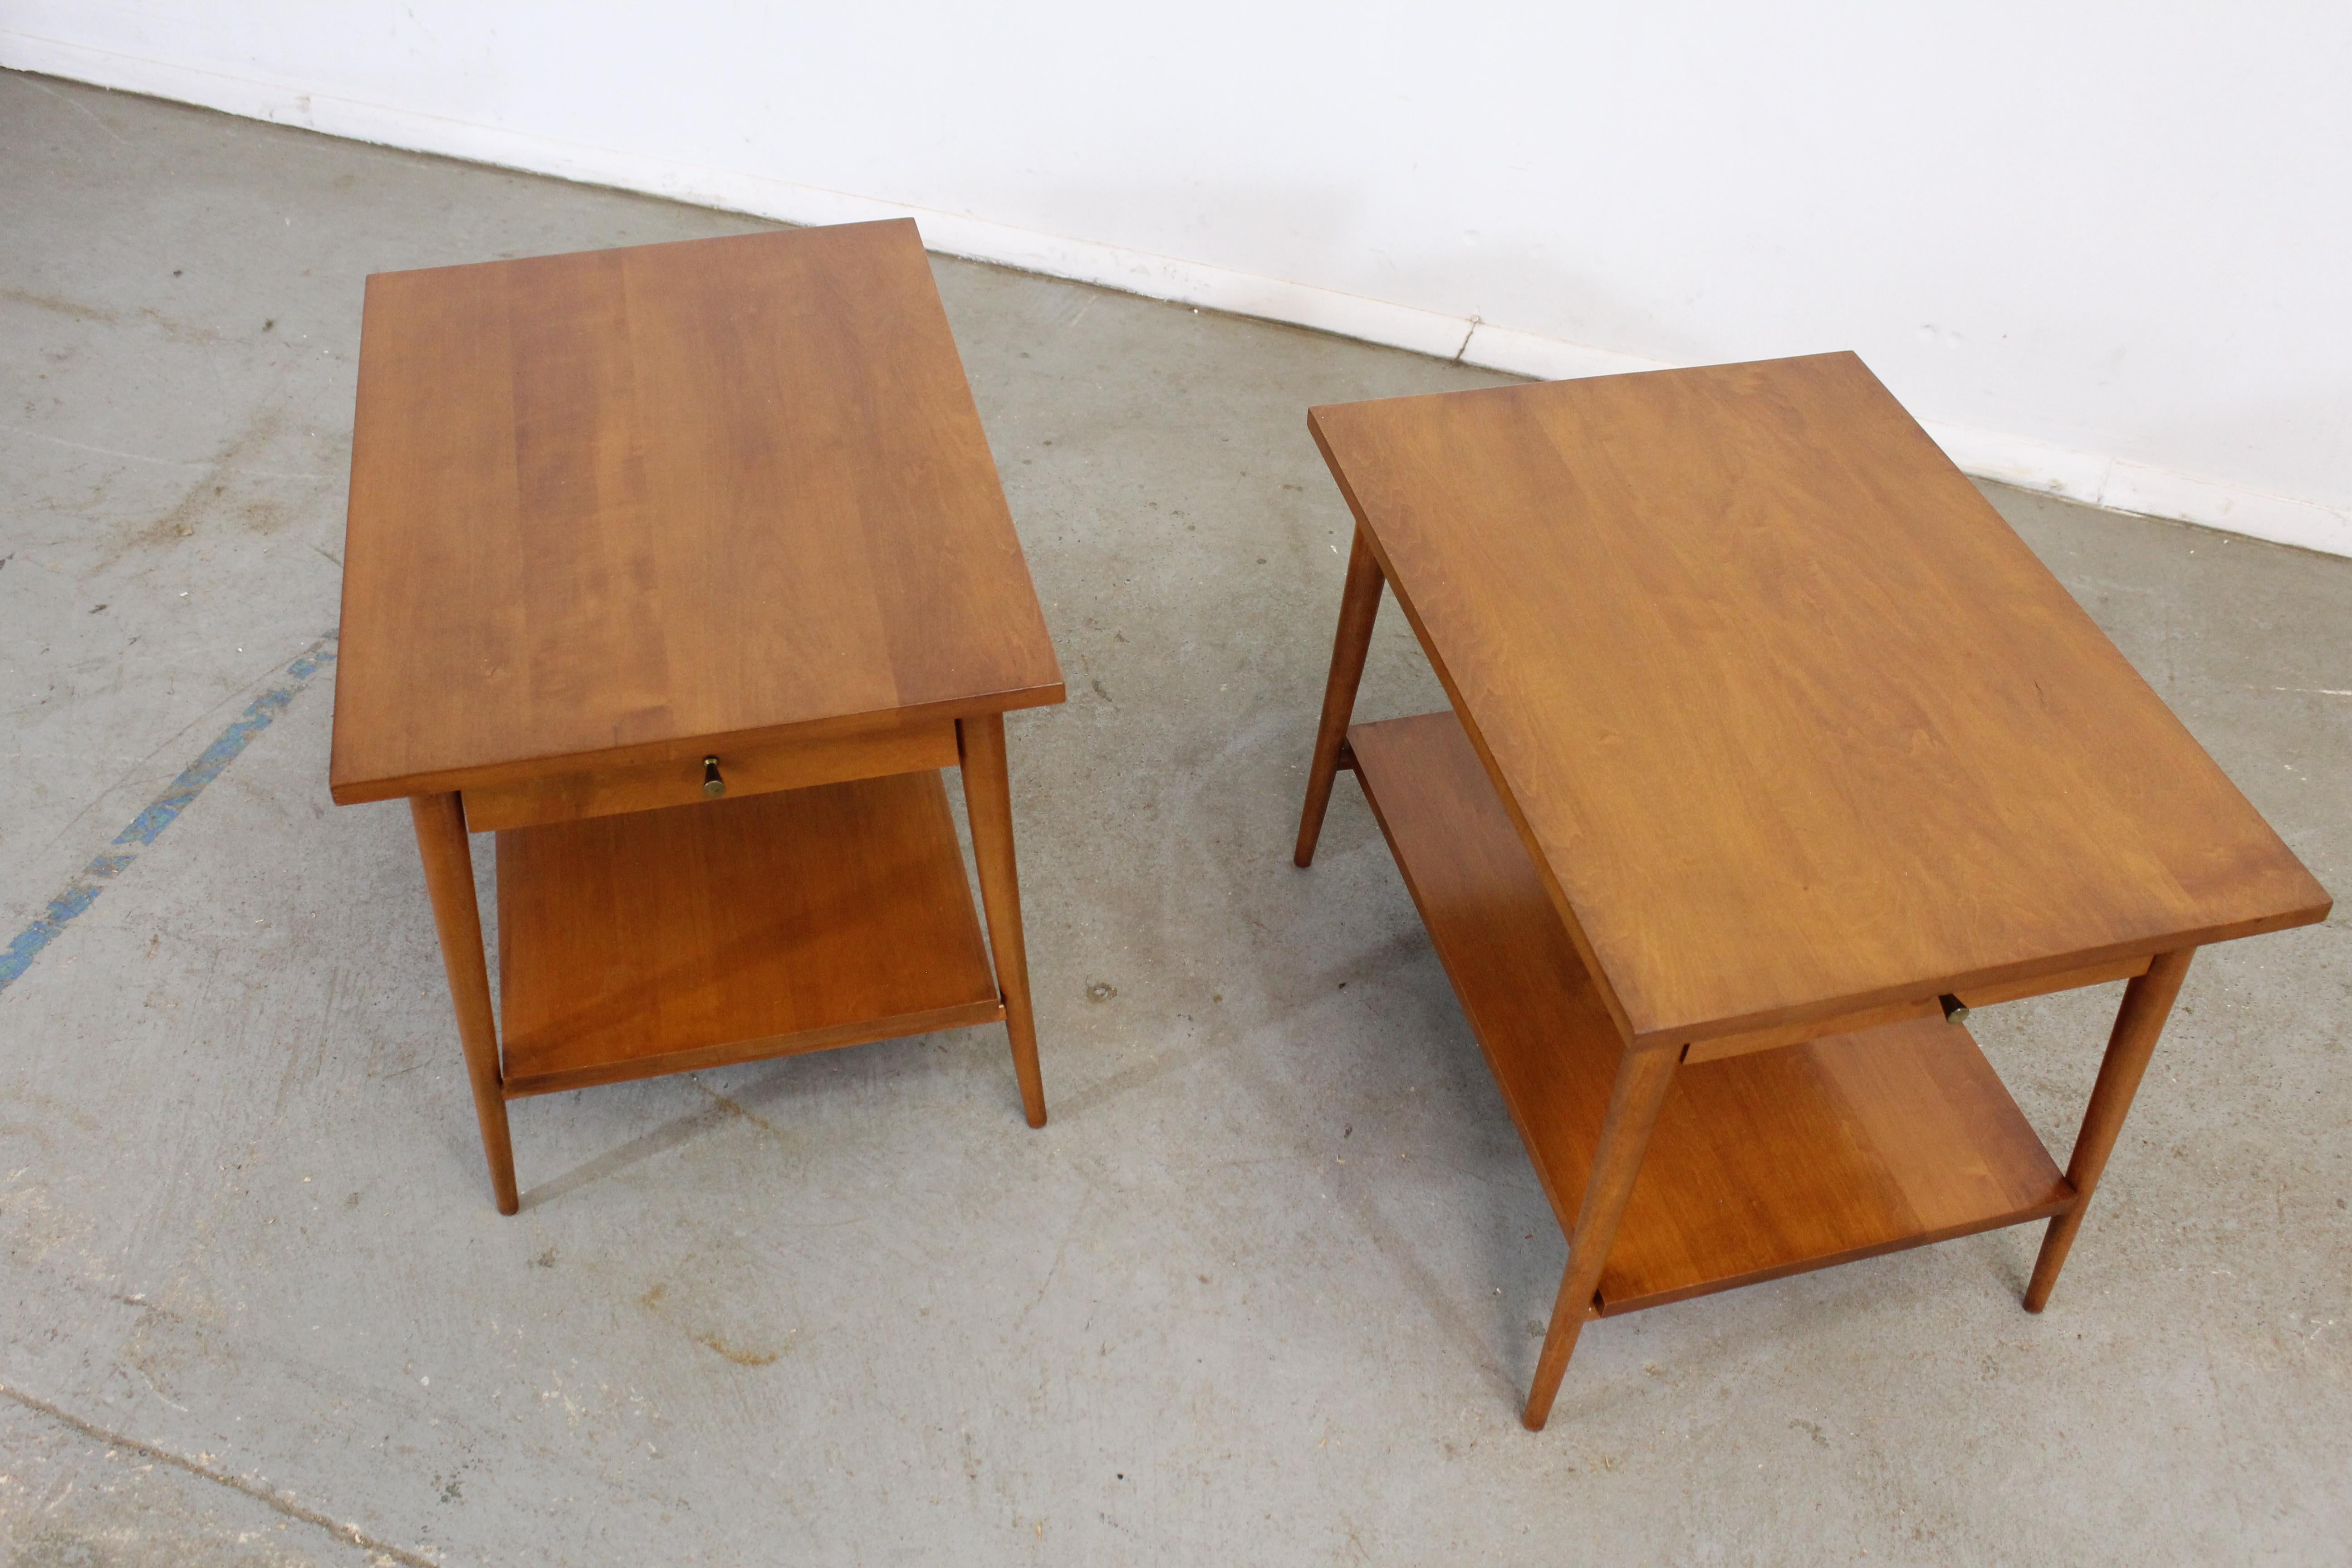 Mid-Century Modern Paul Mccobb nightstands/end tables
Offered is a pair of mid-century nightstands with sleek lines designed by American designer Paul Mccobb. Made from yellow birch, these stands feature beautifully sculpted legs and two drawers